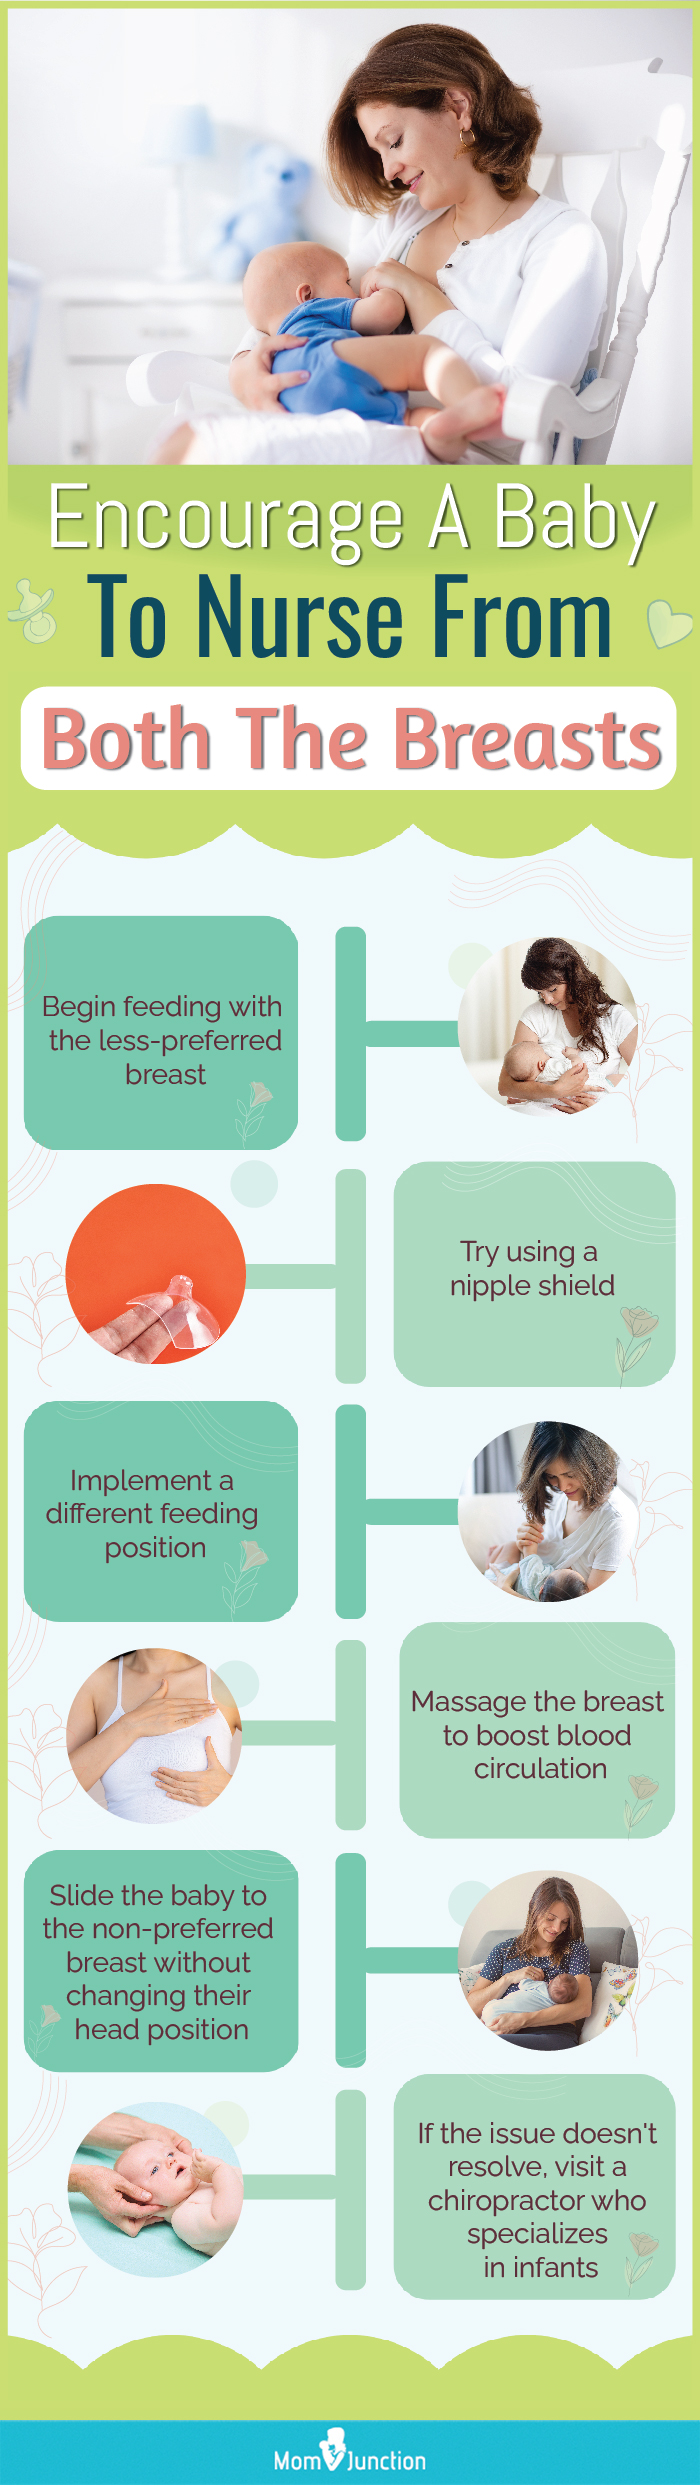 tips to facilitate breastfeeding from both breasts (infographic)